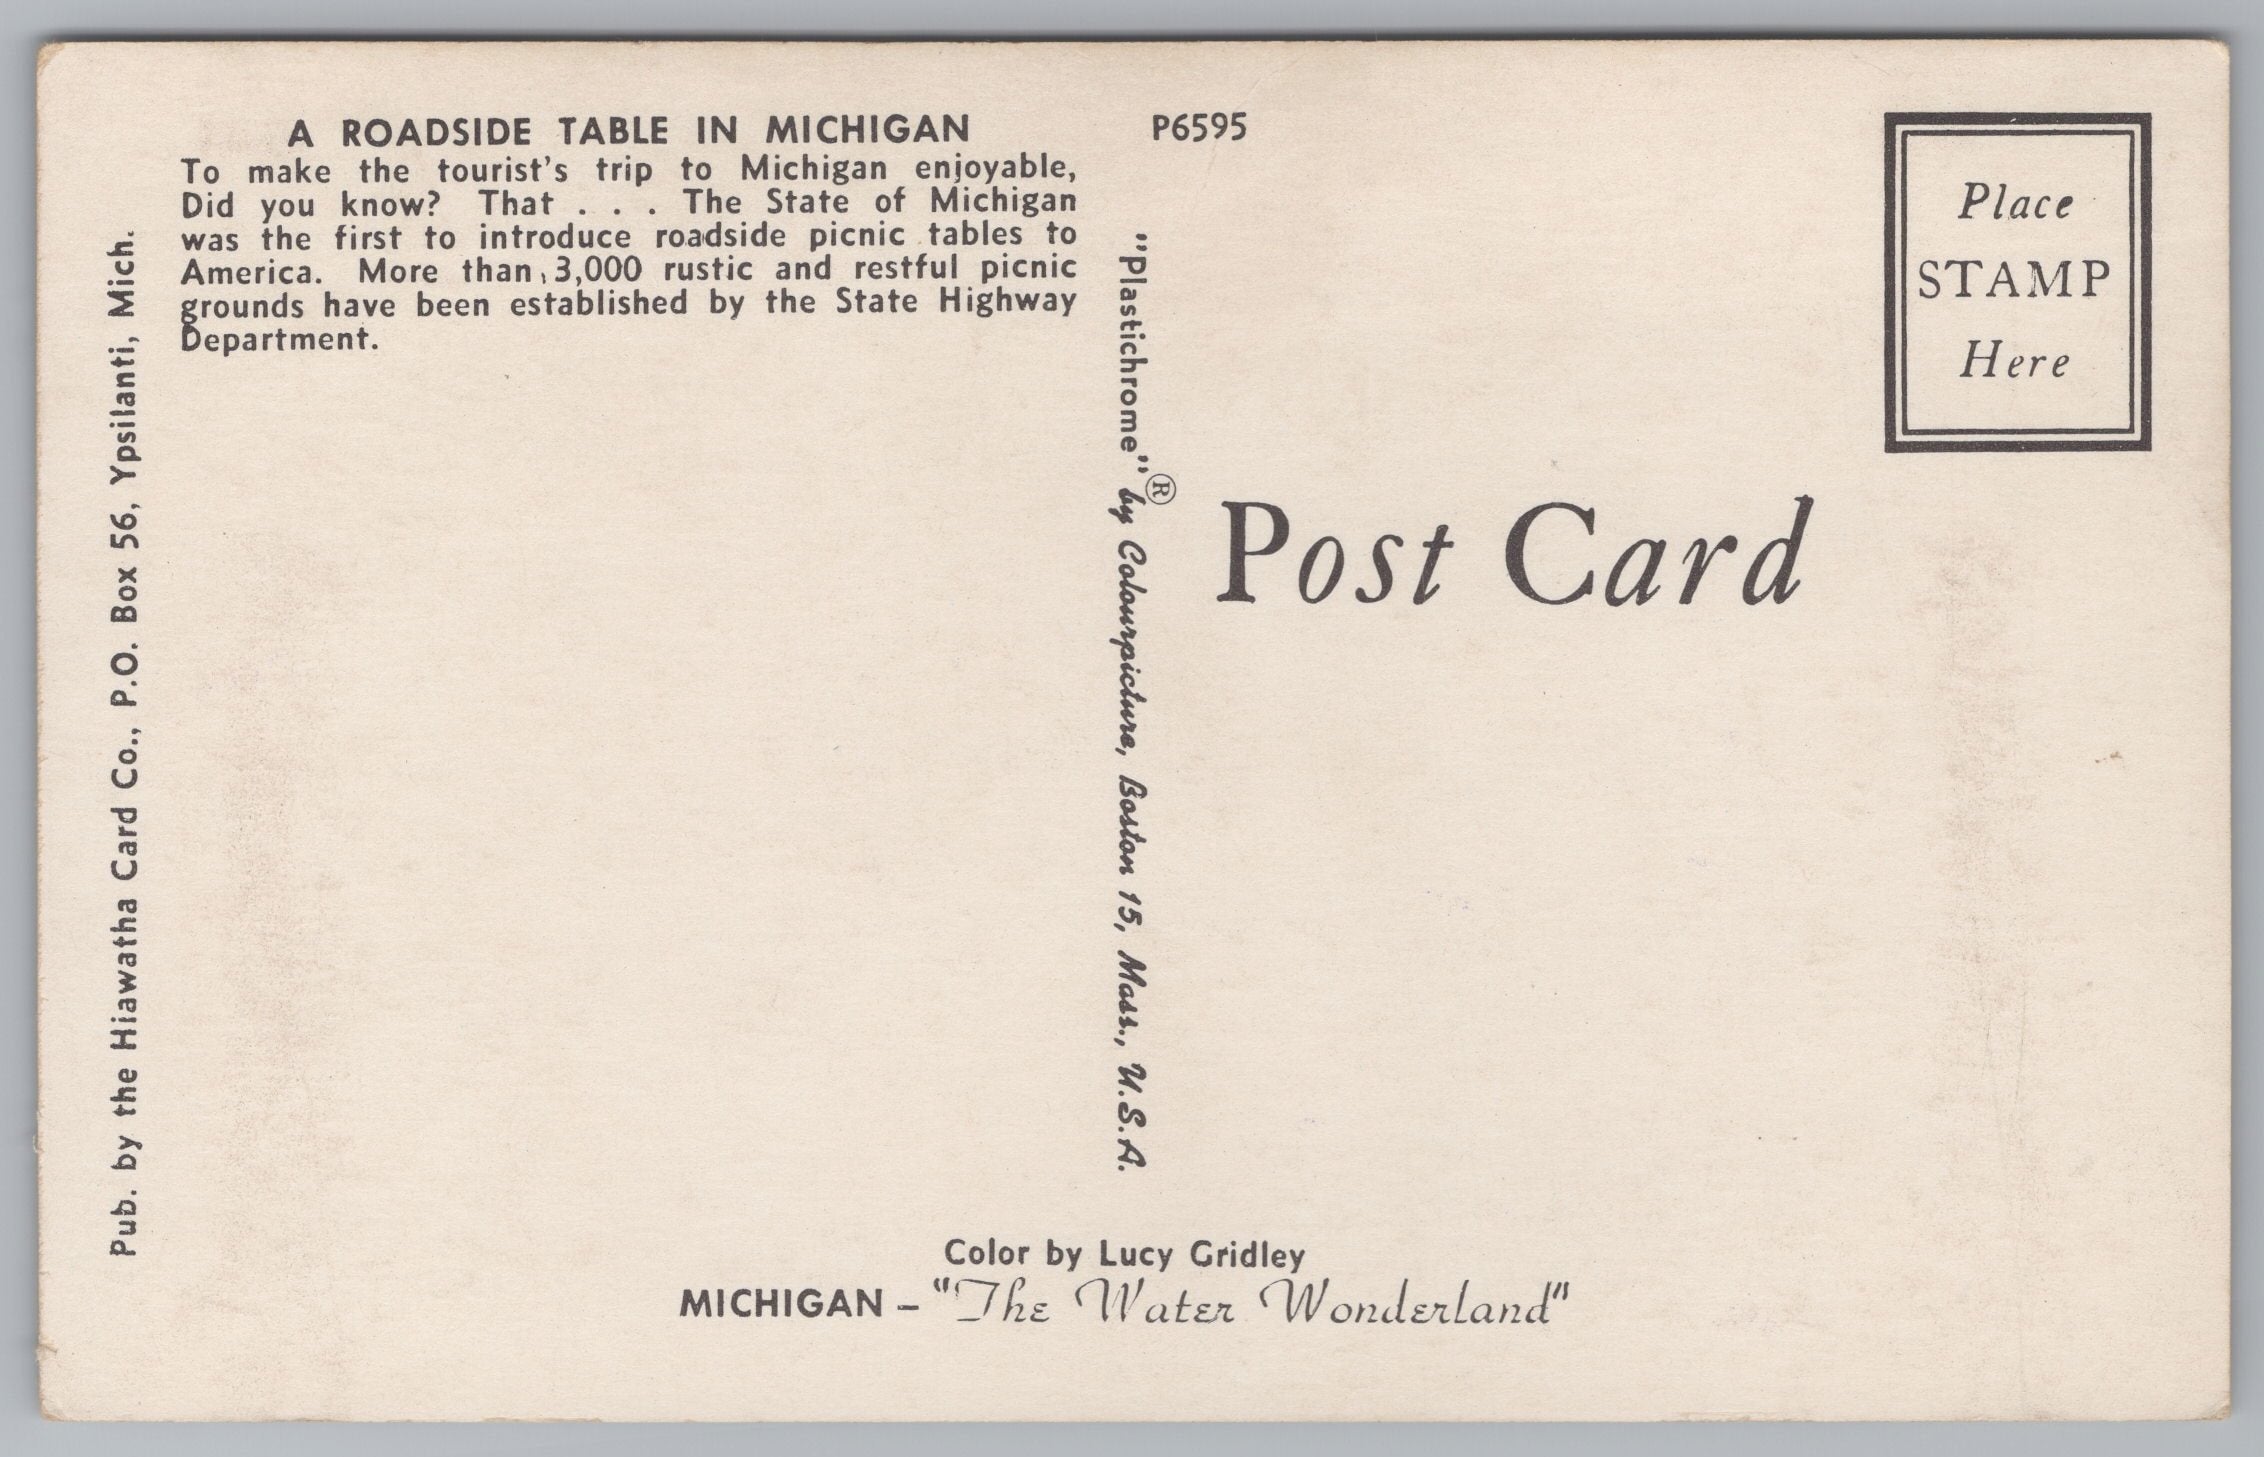 A Roadside Table In Michigan, USA, Vintage Post Card.